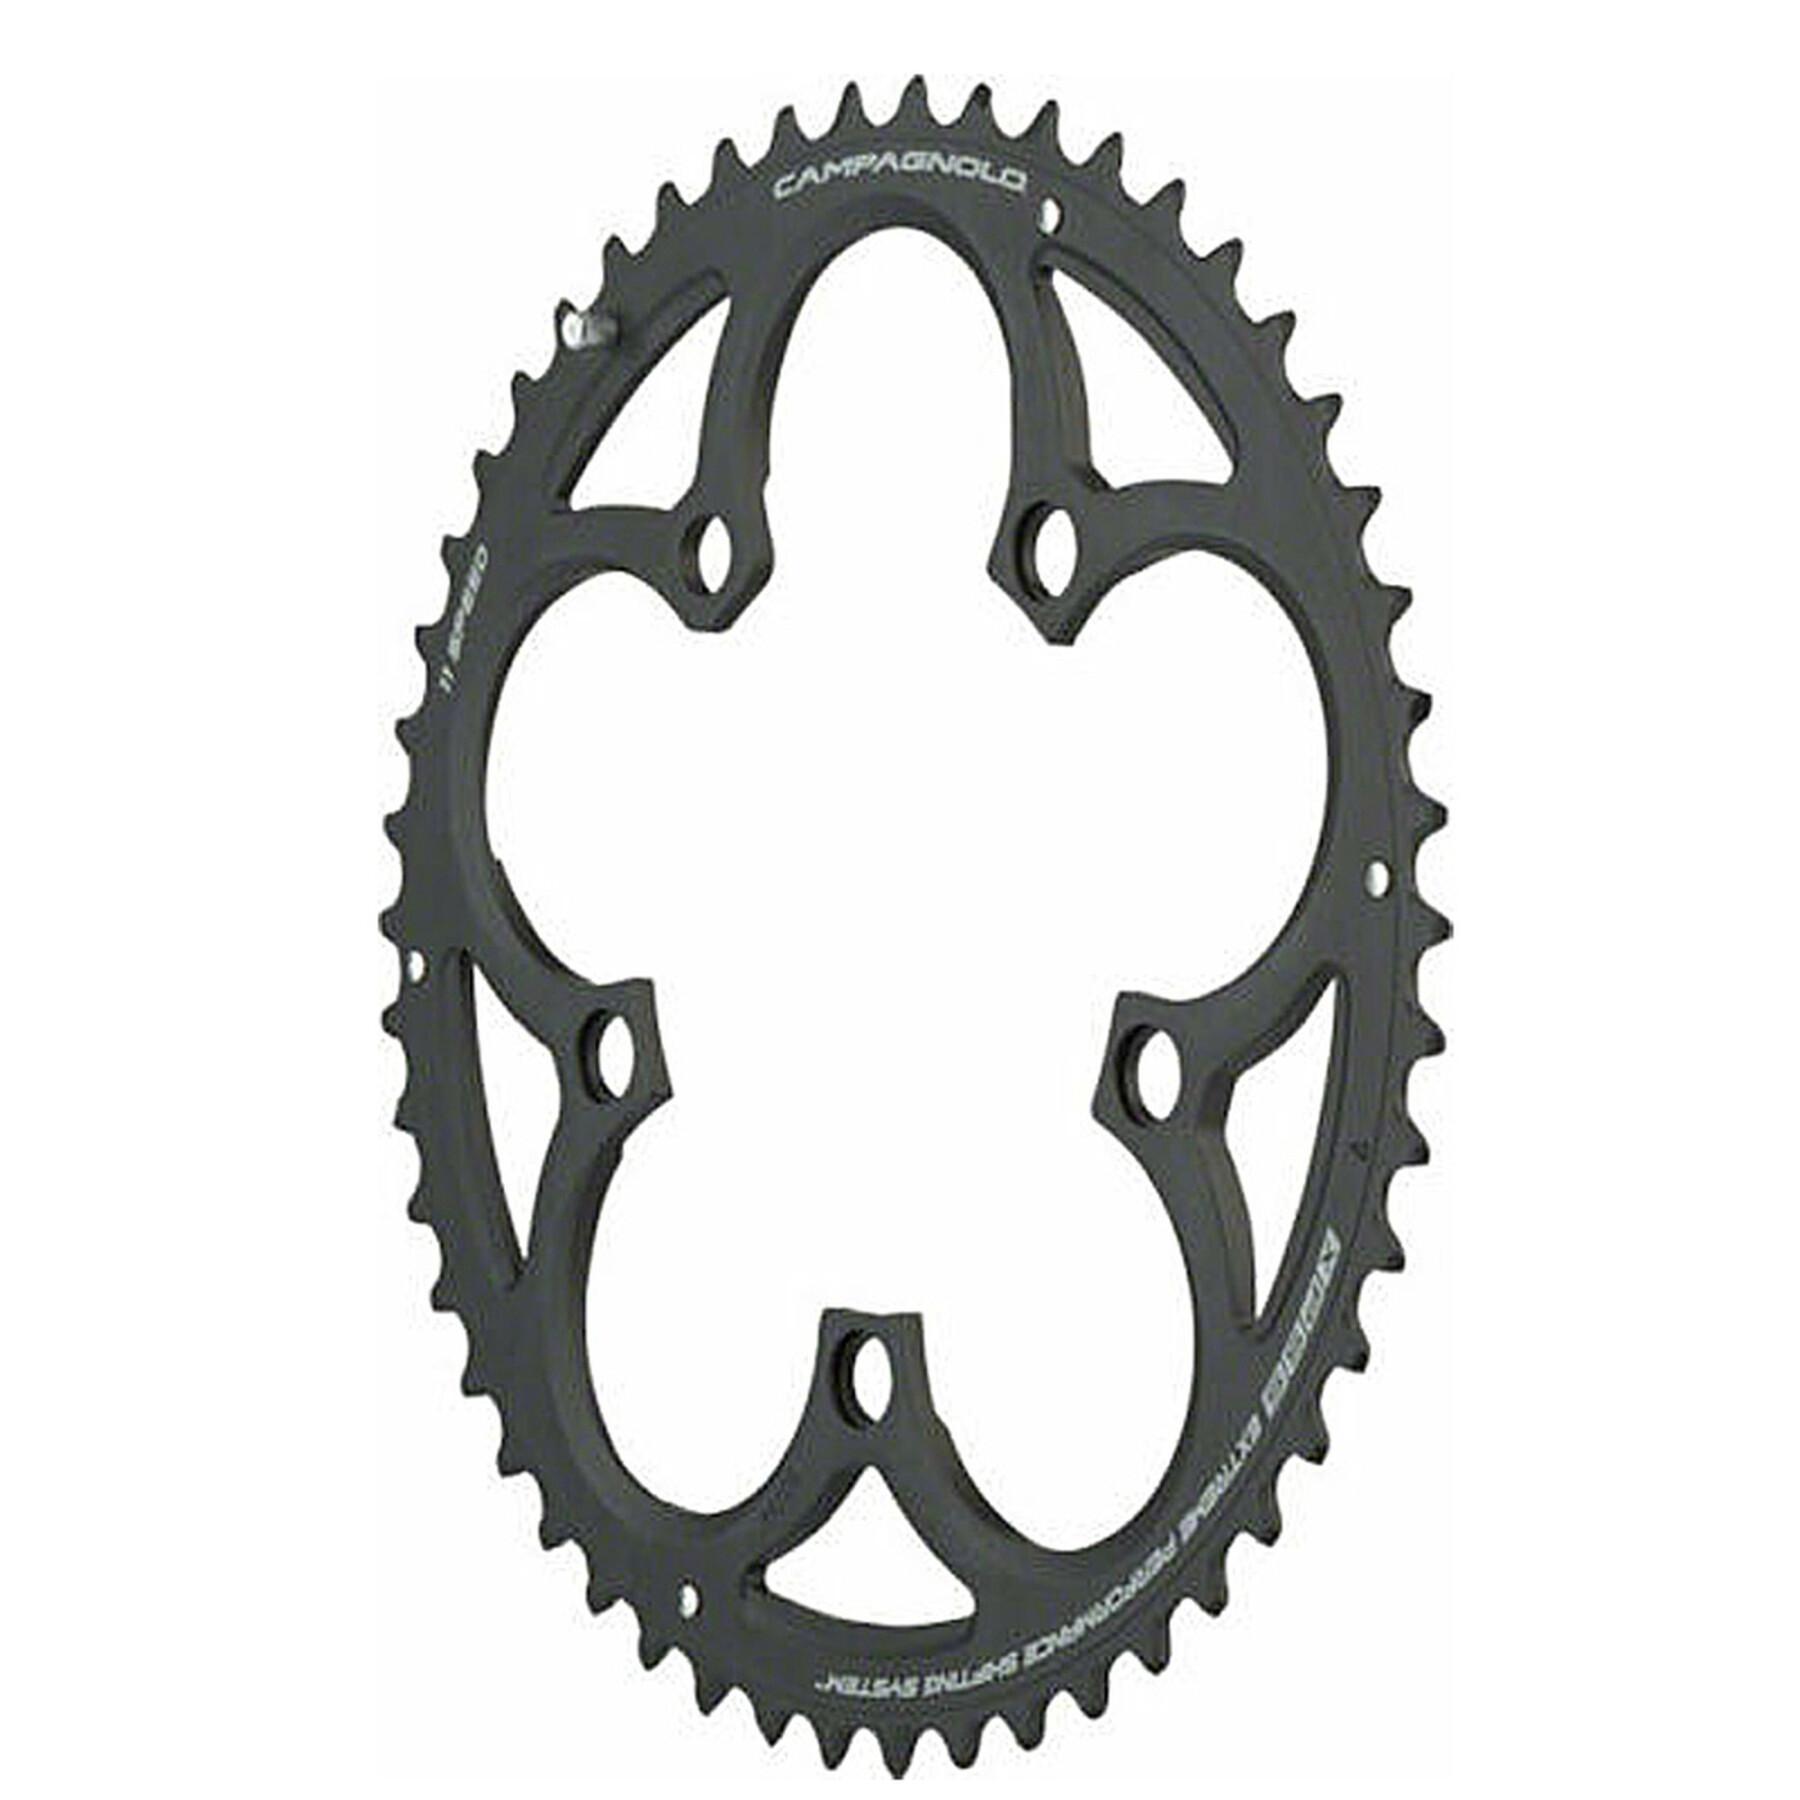 Plateaux 5 branches Campagnolo Athena 100 BCD